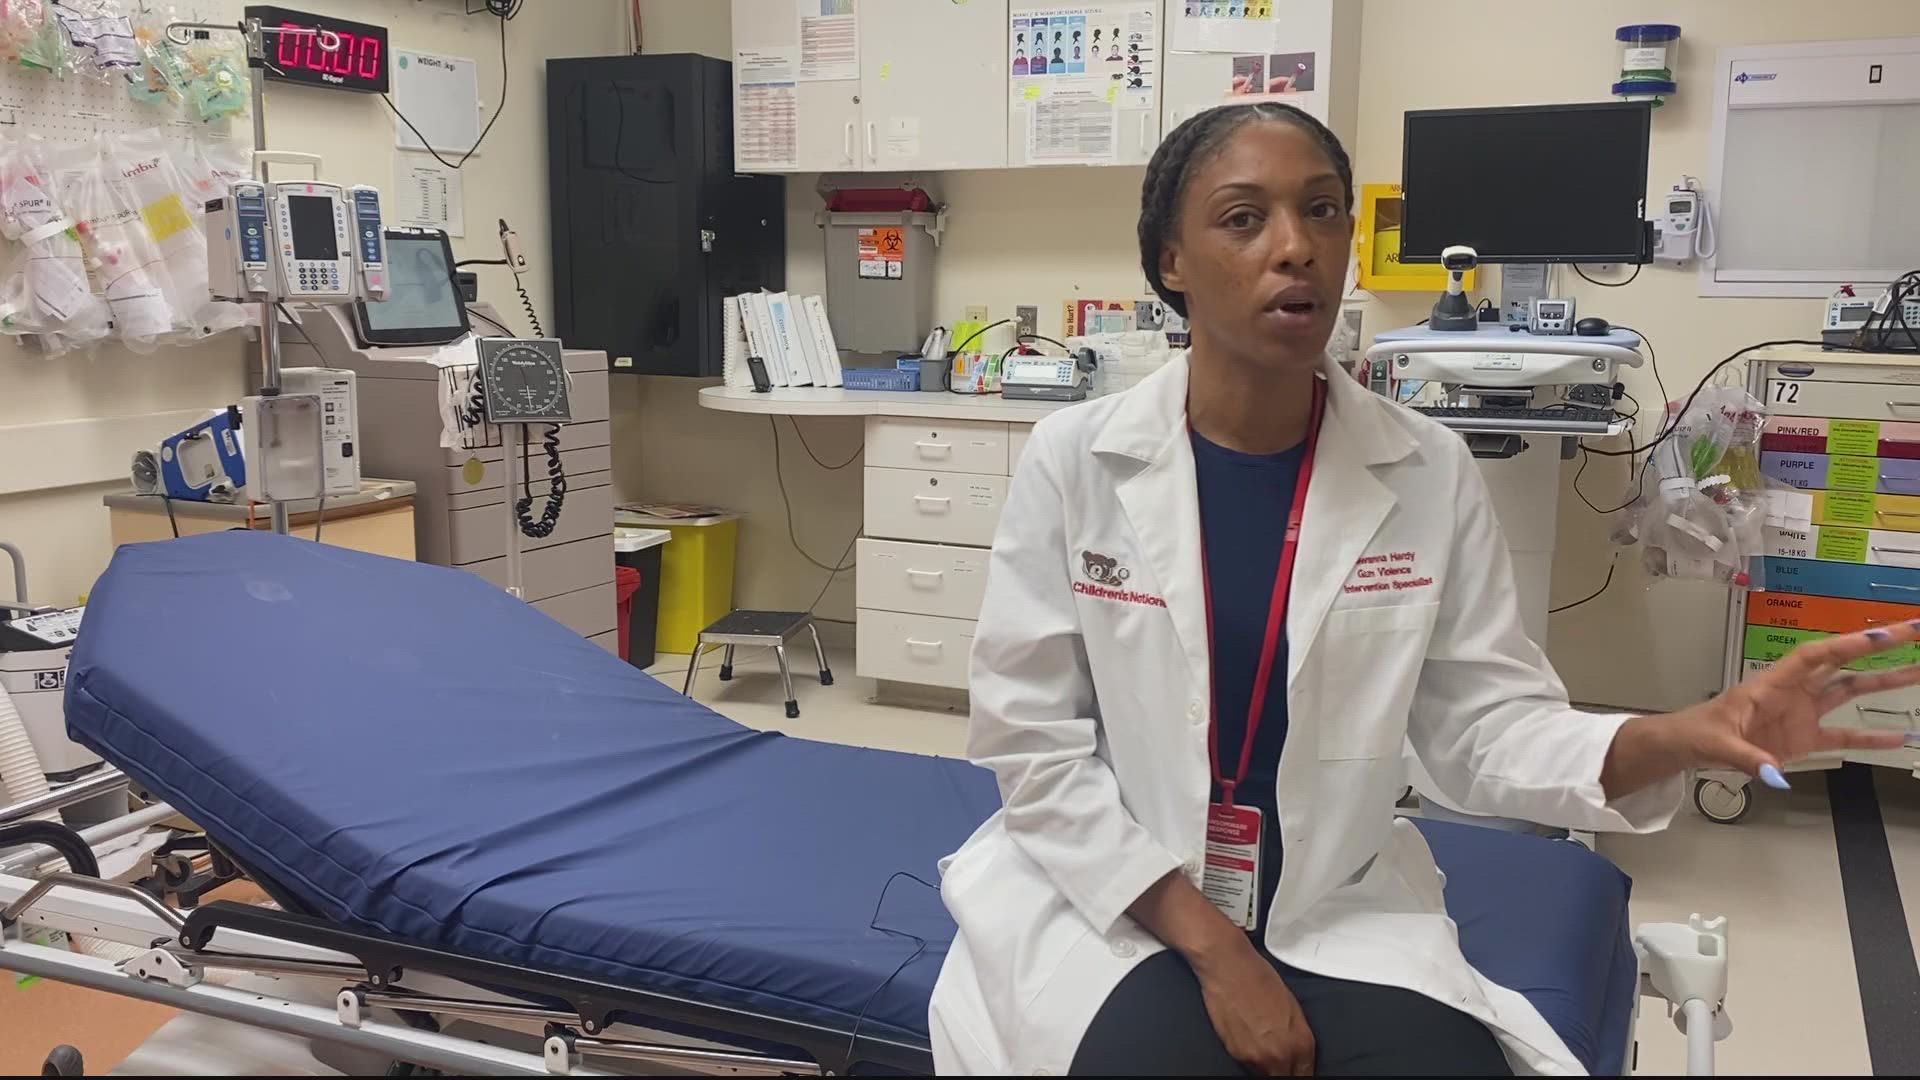 The new role of Gun Violence Intervention Specialist hopes to make a child's first visit to the Emergency Department their last.